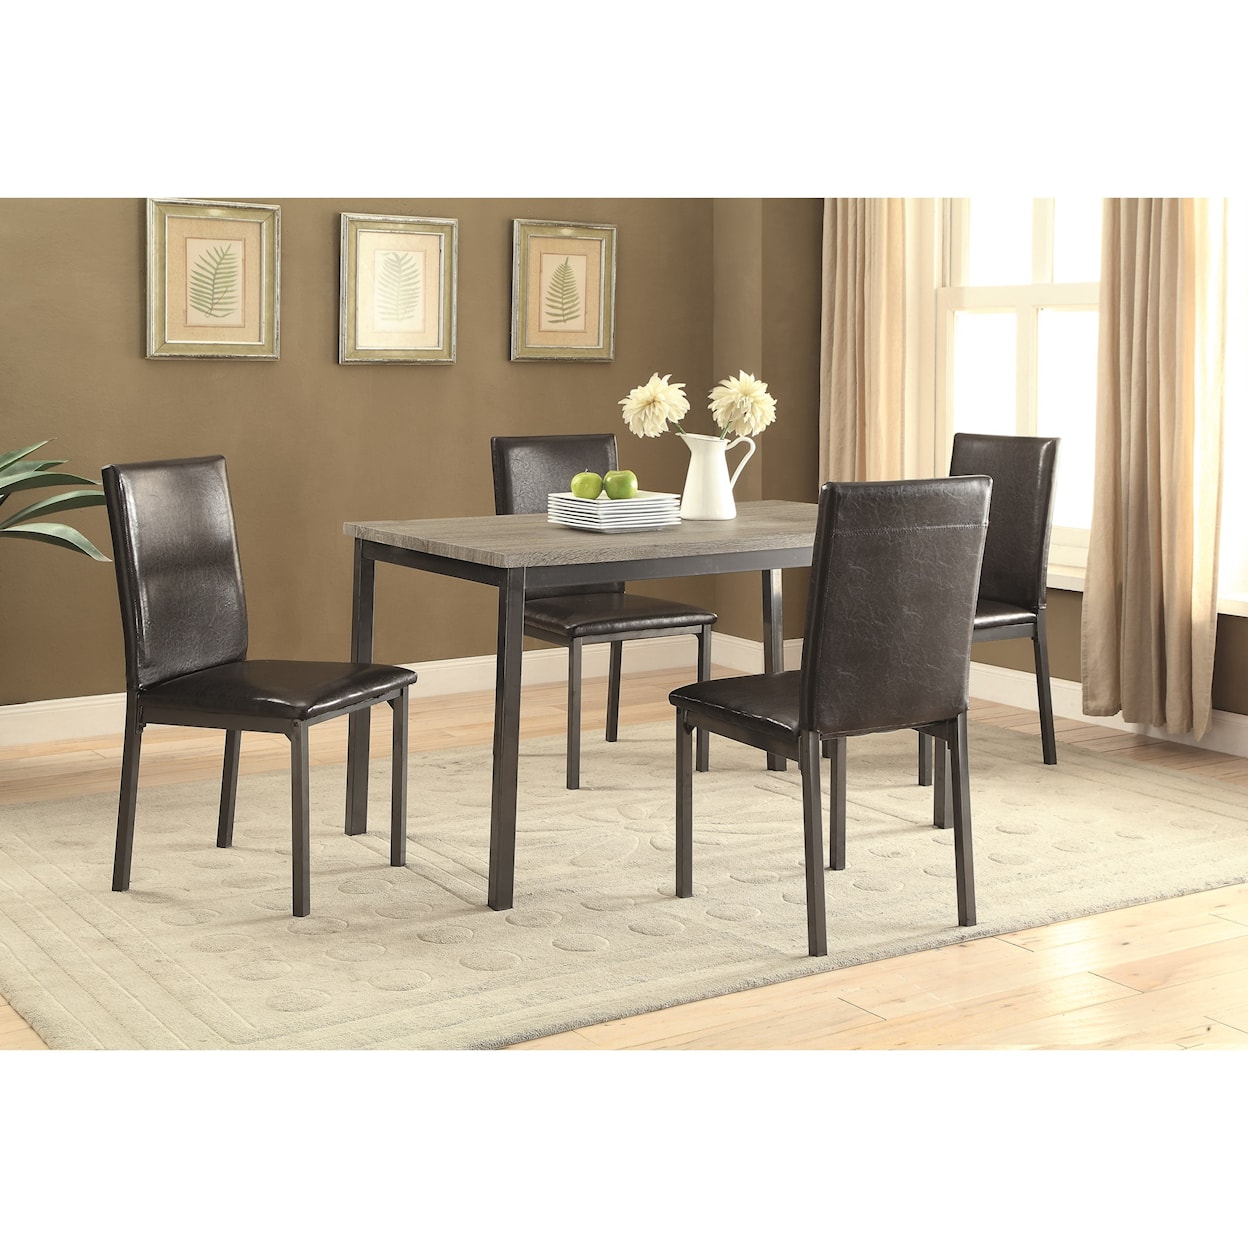 Coaster Garza Upholstered Dining Chair